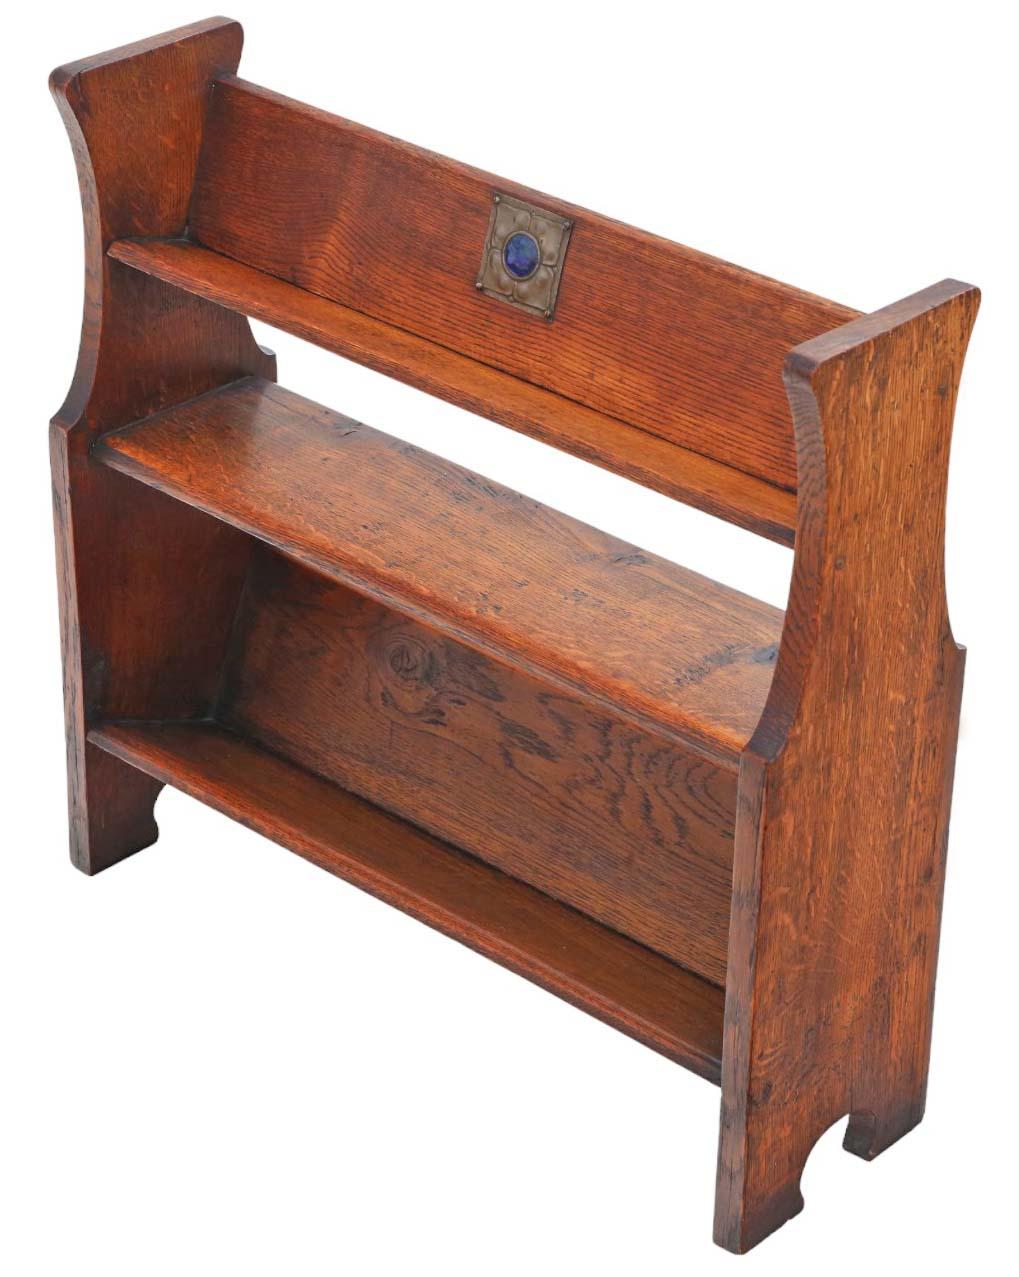 Antique, high-quality Art Nouveau oak bookcase book trough stand circa 1910, crafted in the manner of Liberty.

This piece is solid and robust, boasting no loose joints or woodworm. A charming and rare quality find.

Sure to make a statement in the